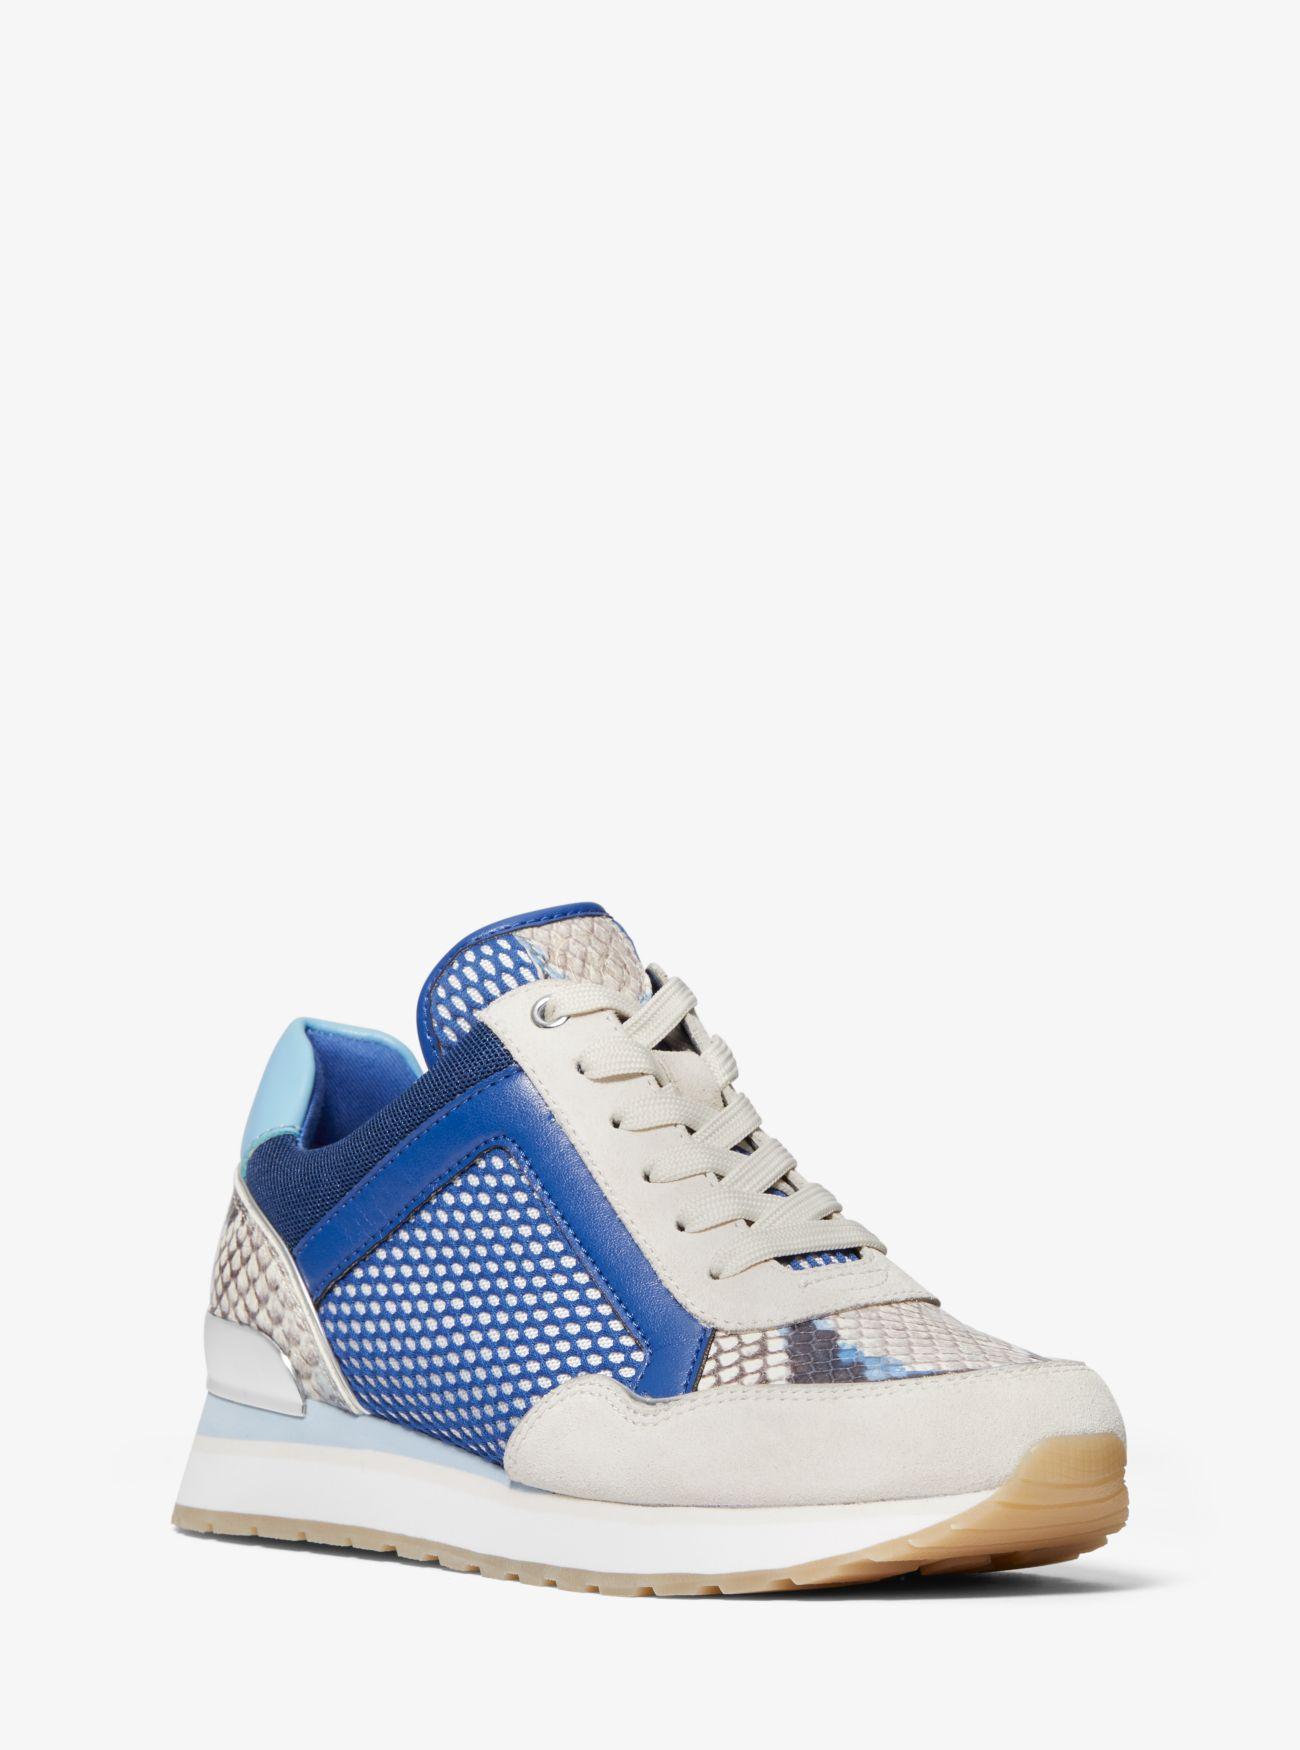 Michael Kors Denim Maddy Mixed-media Trainer in Blue - Lyst